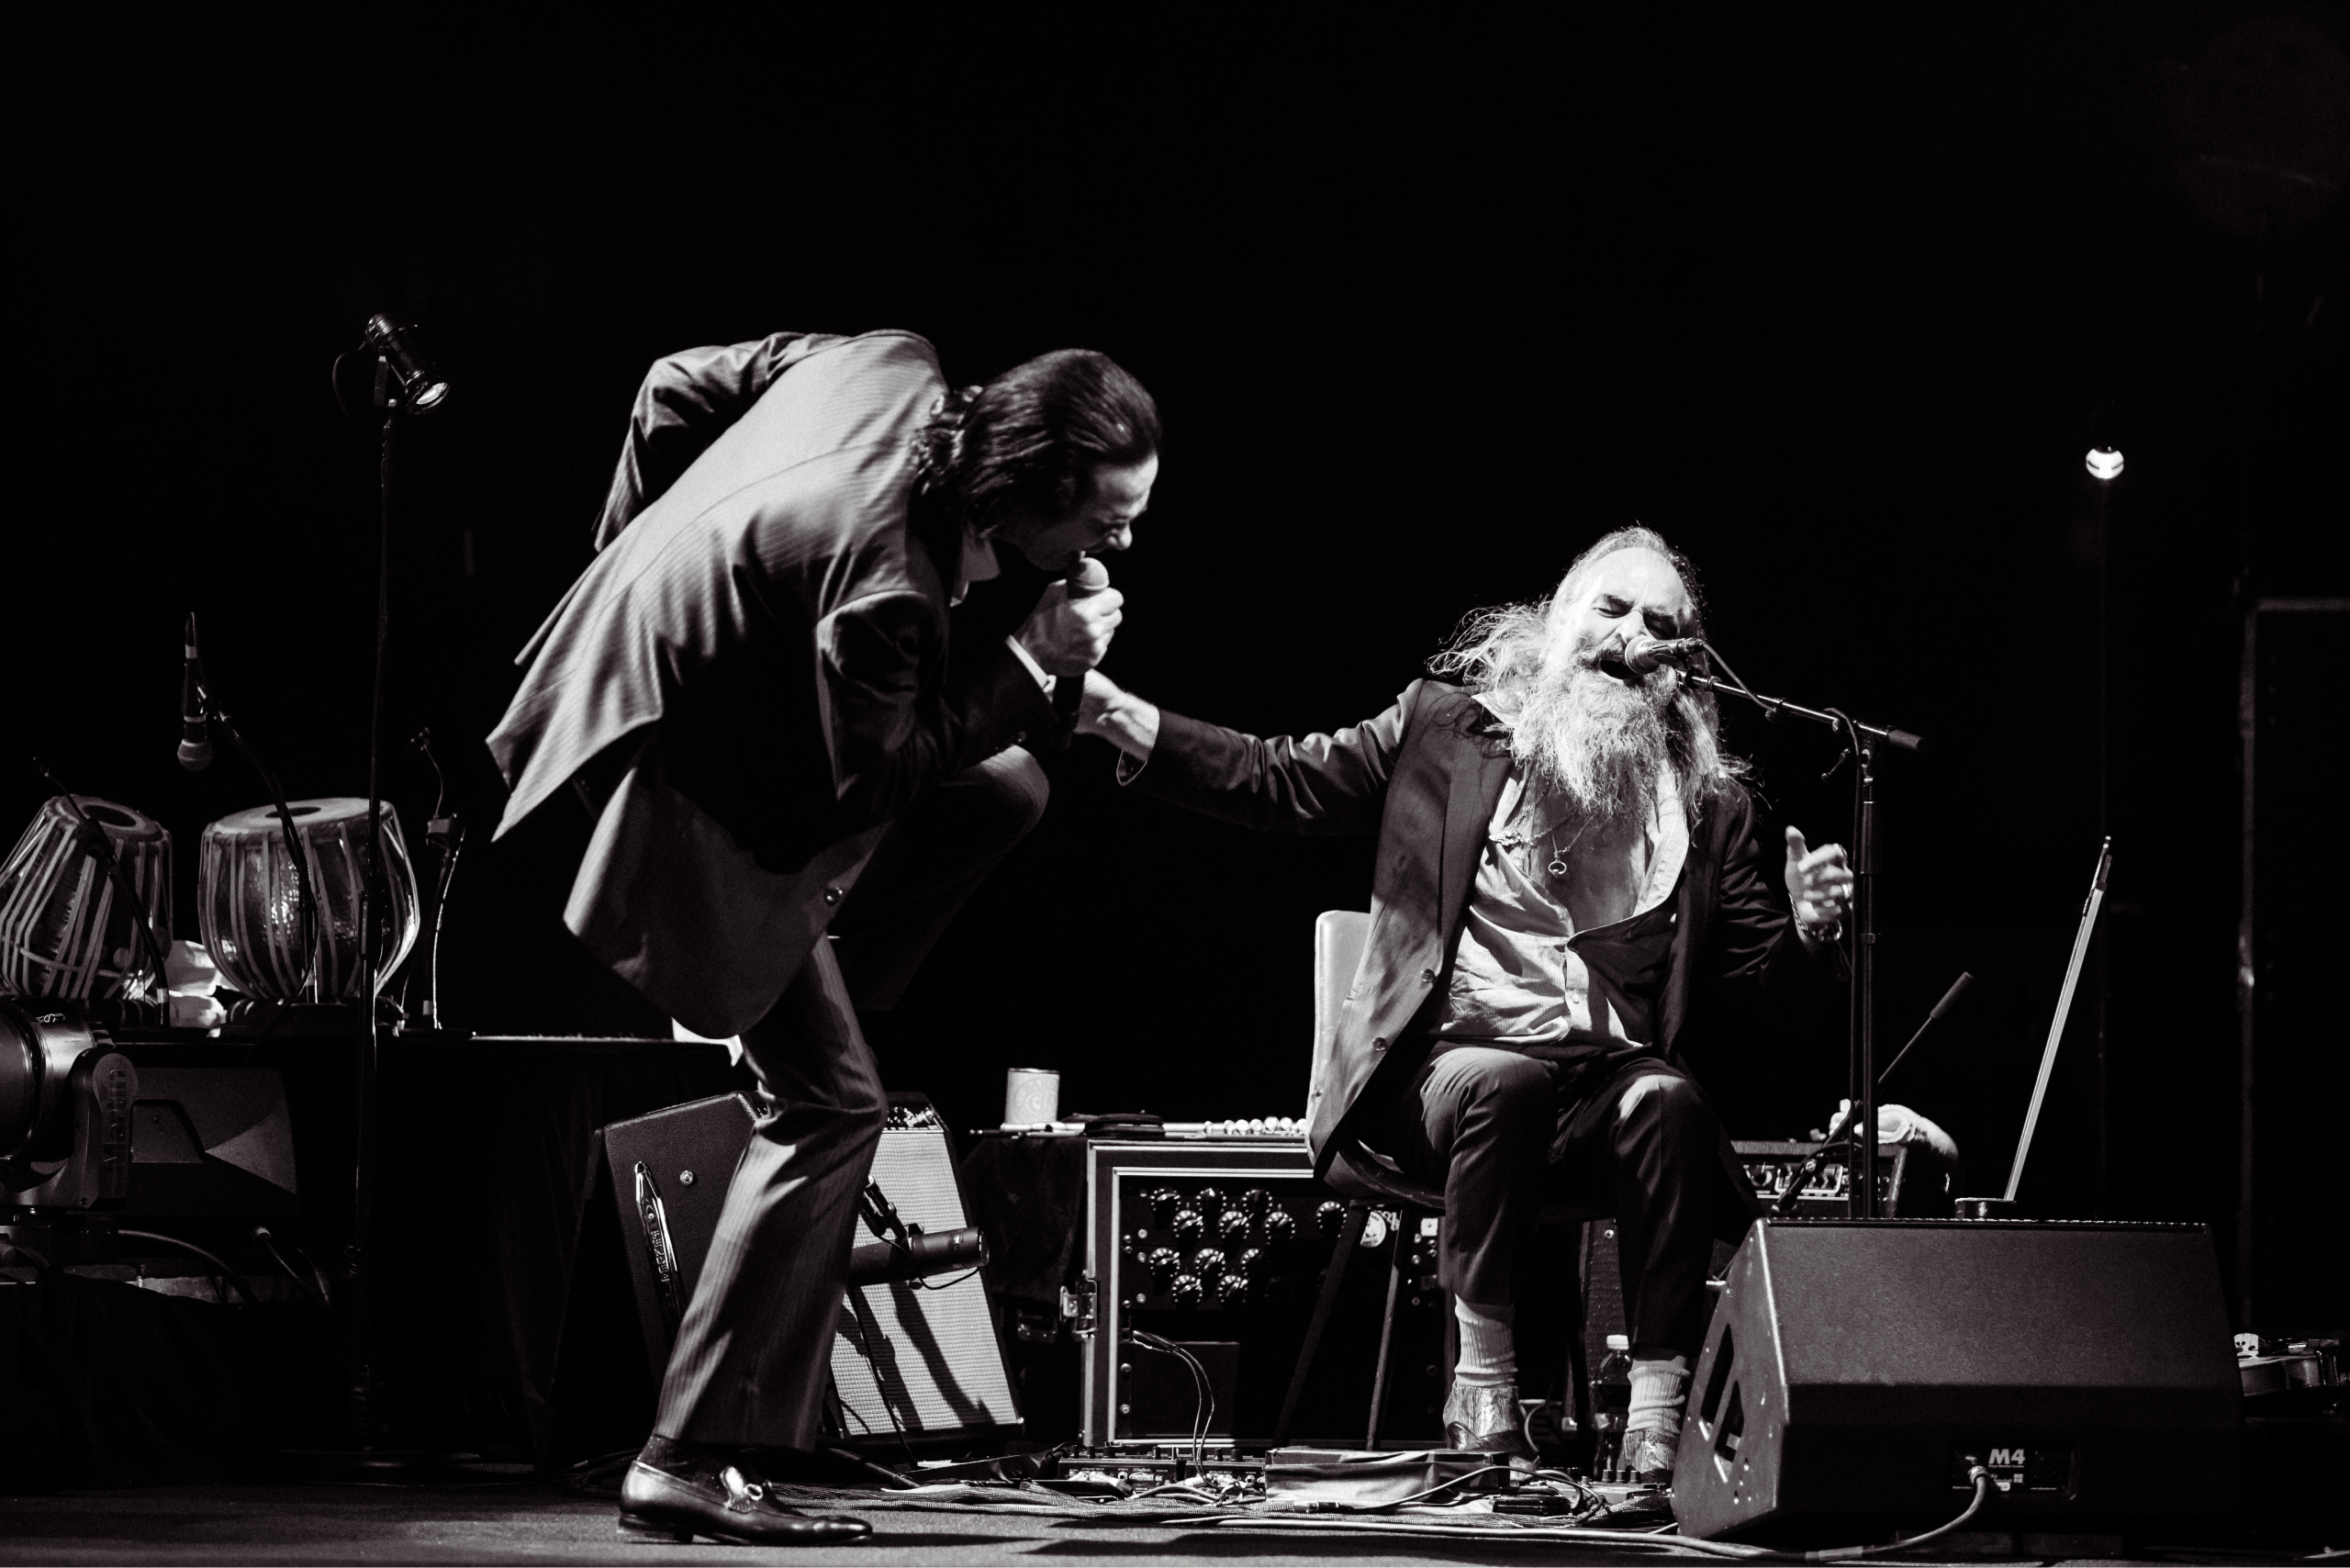 Nick Cave, a tall singer moves energetically during performance while Warren Ellis is seated next to him, singing into a microphone.